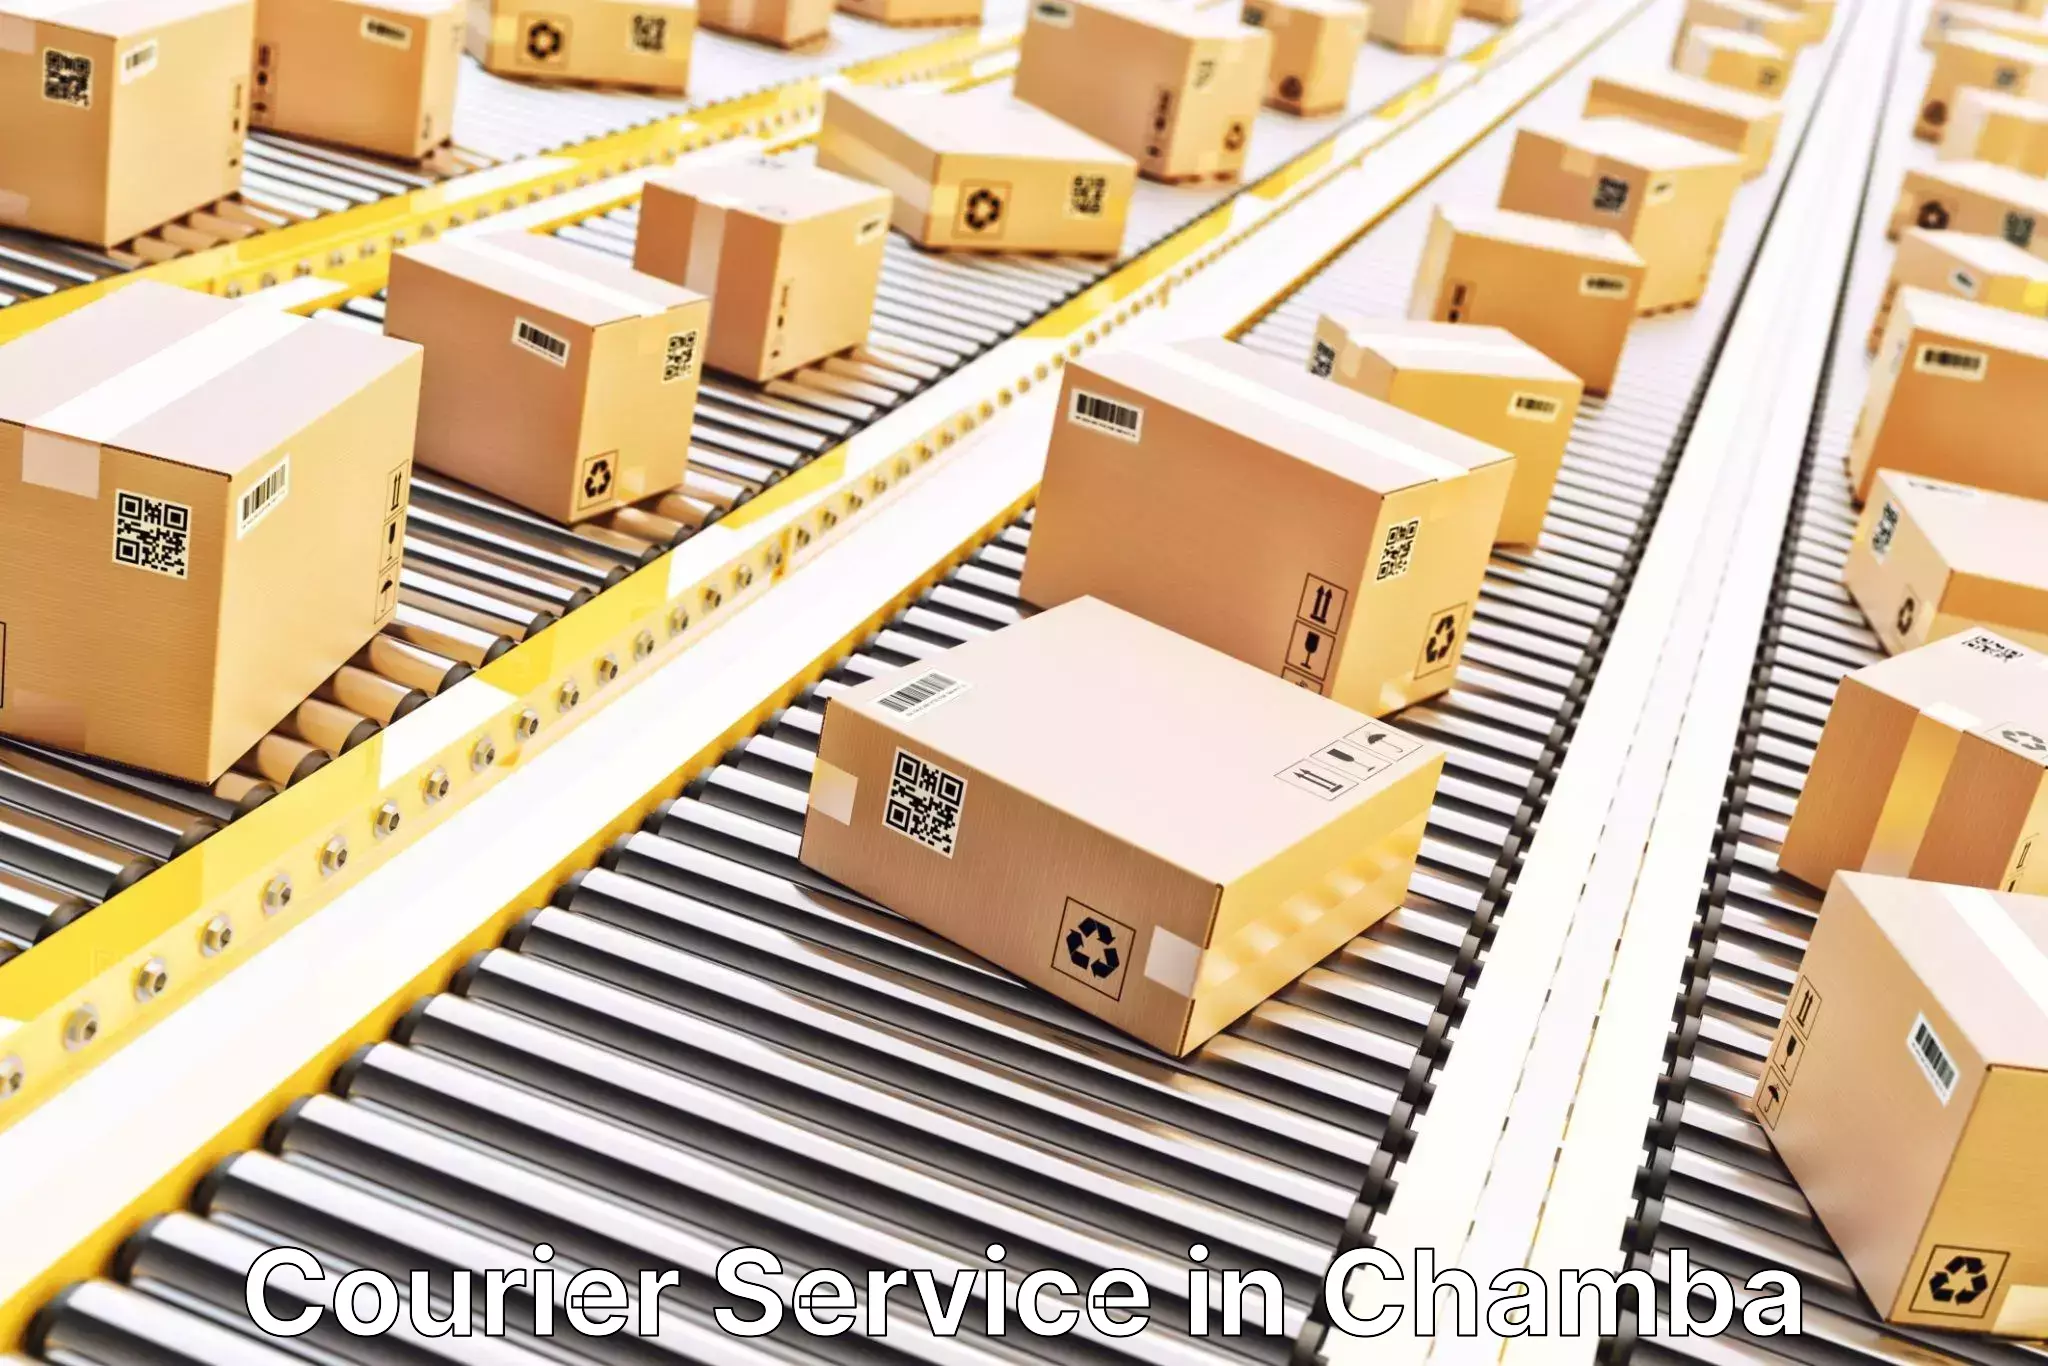 Rapid shipping services in Chamba